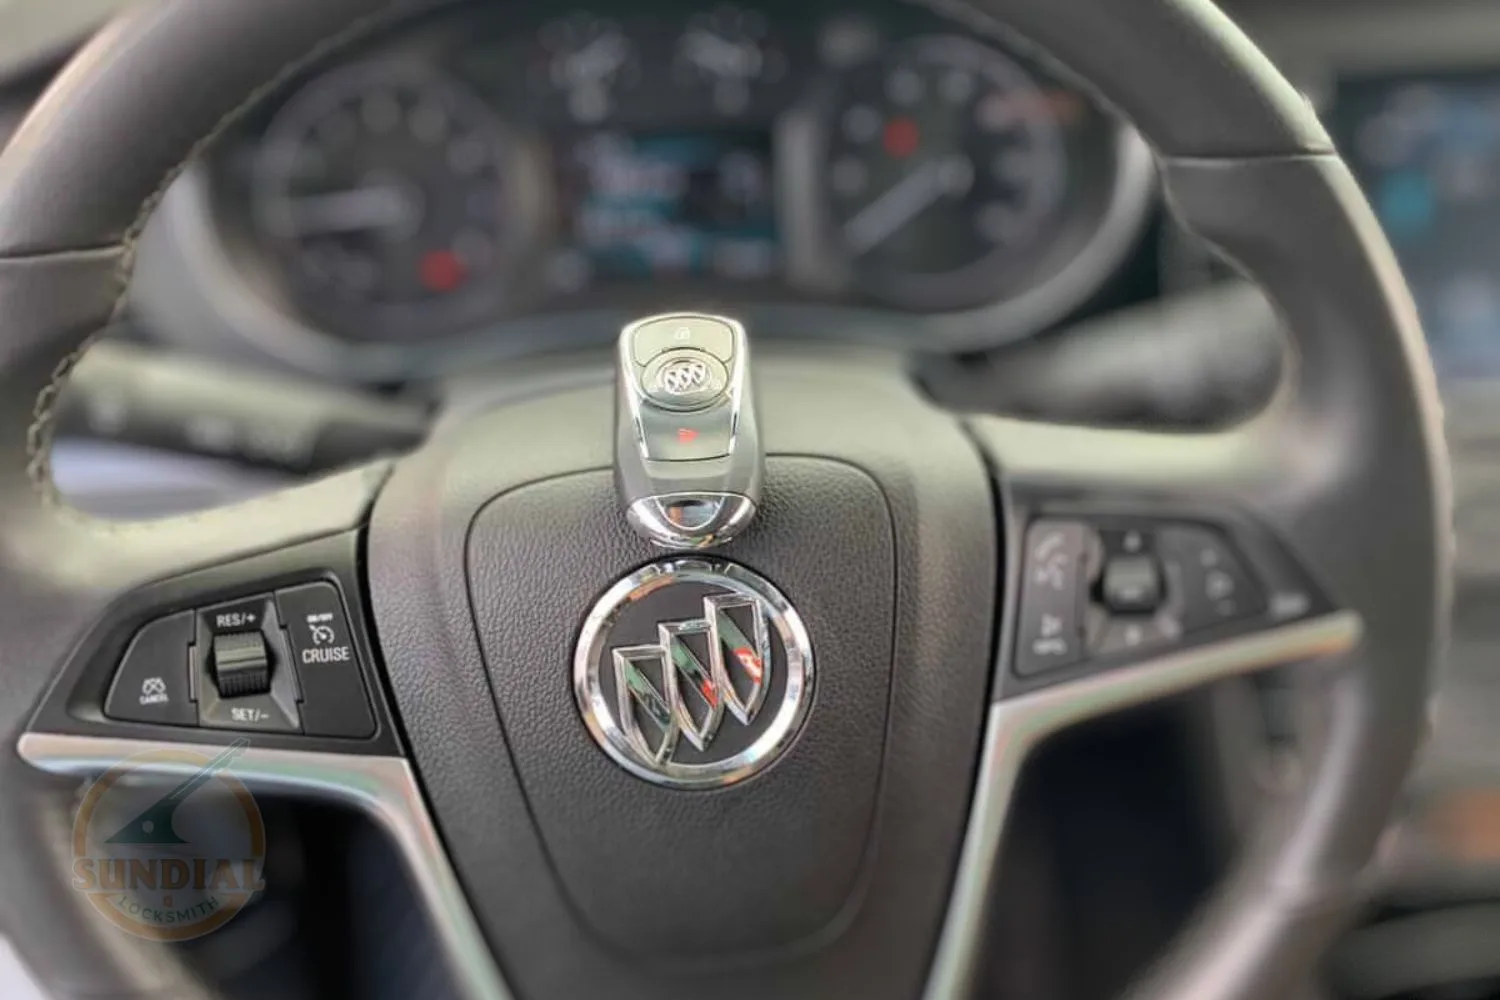 A Buick car key fob placed on the steering wheel emblem inside the vehicle, highlighting professional locksmith services.